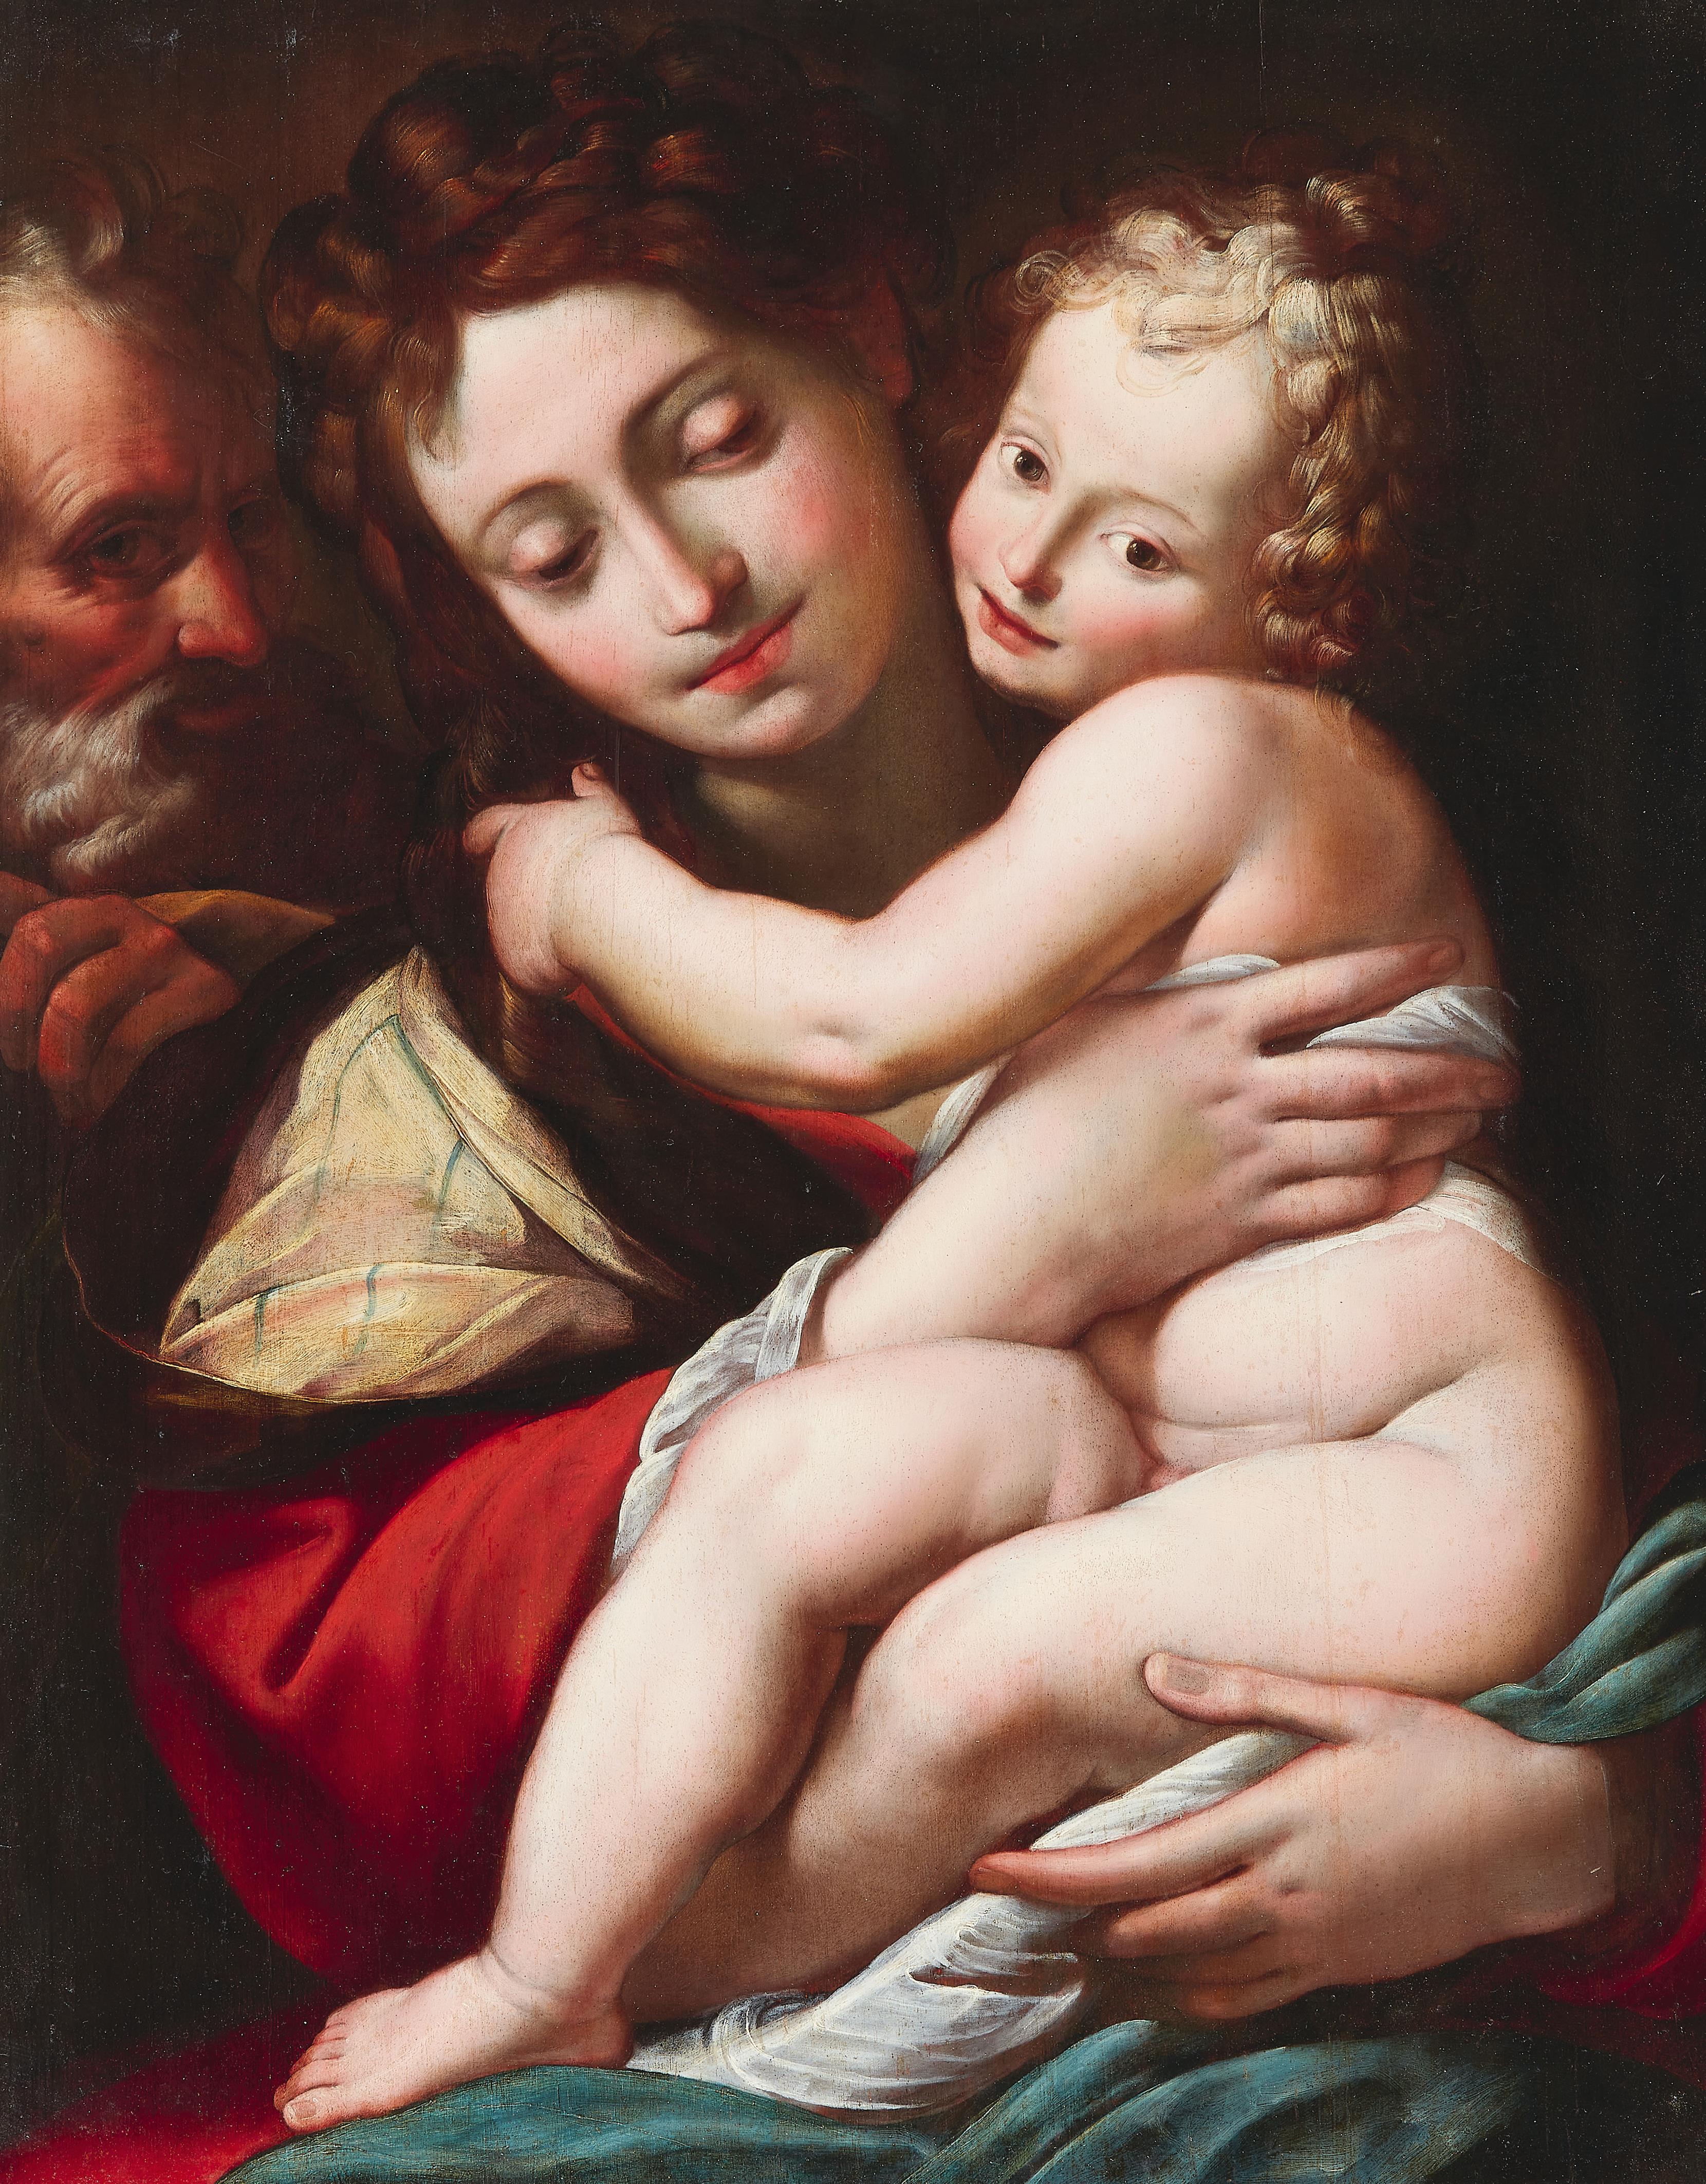 Giulio Cesare Procaccini, attributed to - The Holy Family - image-1